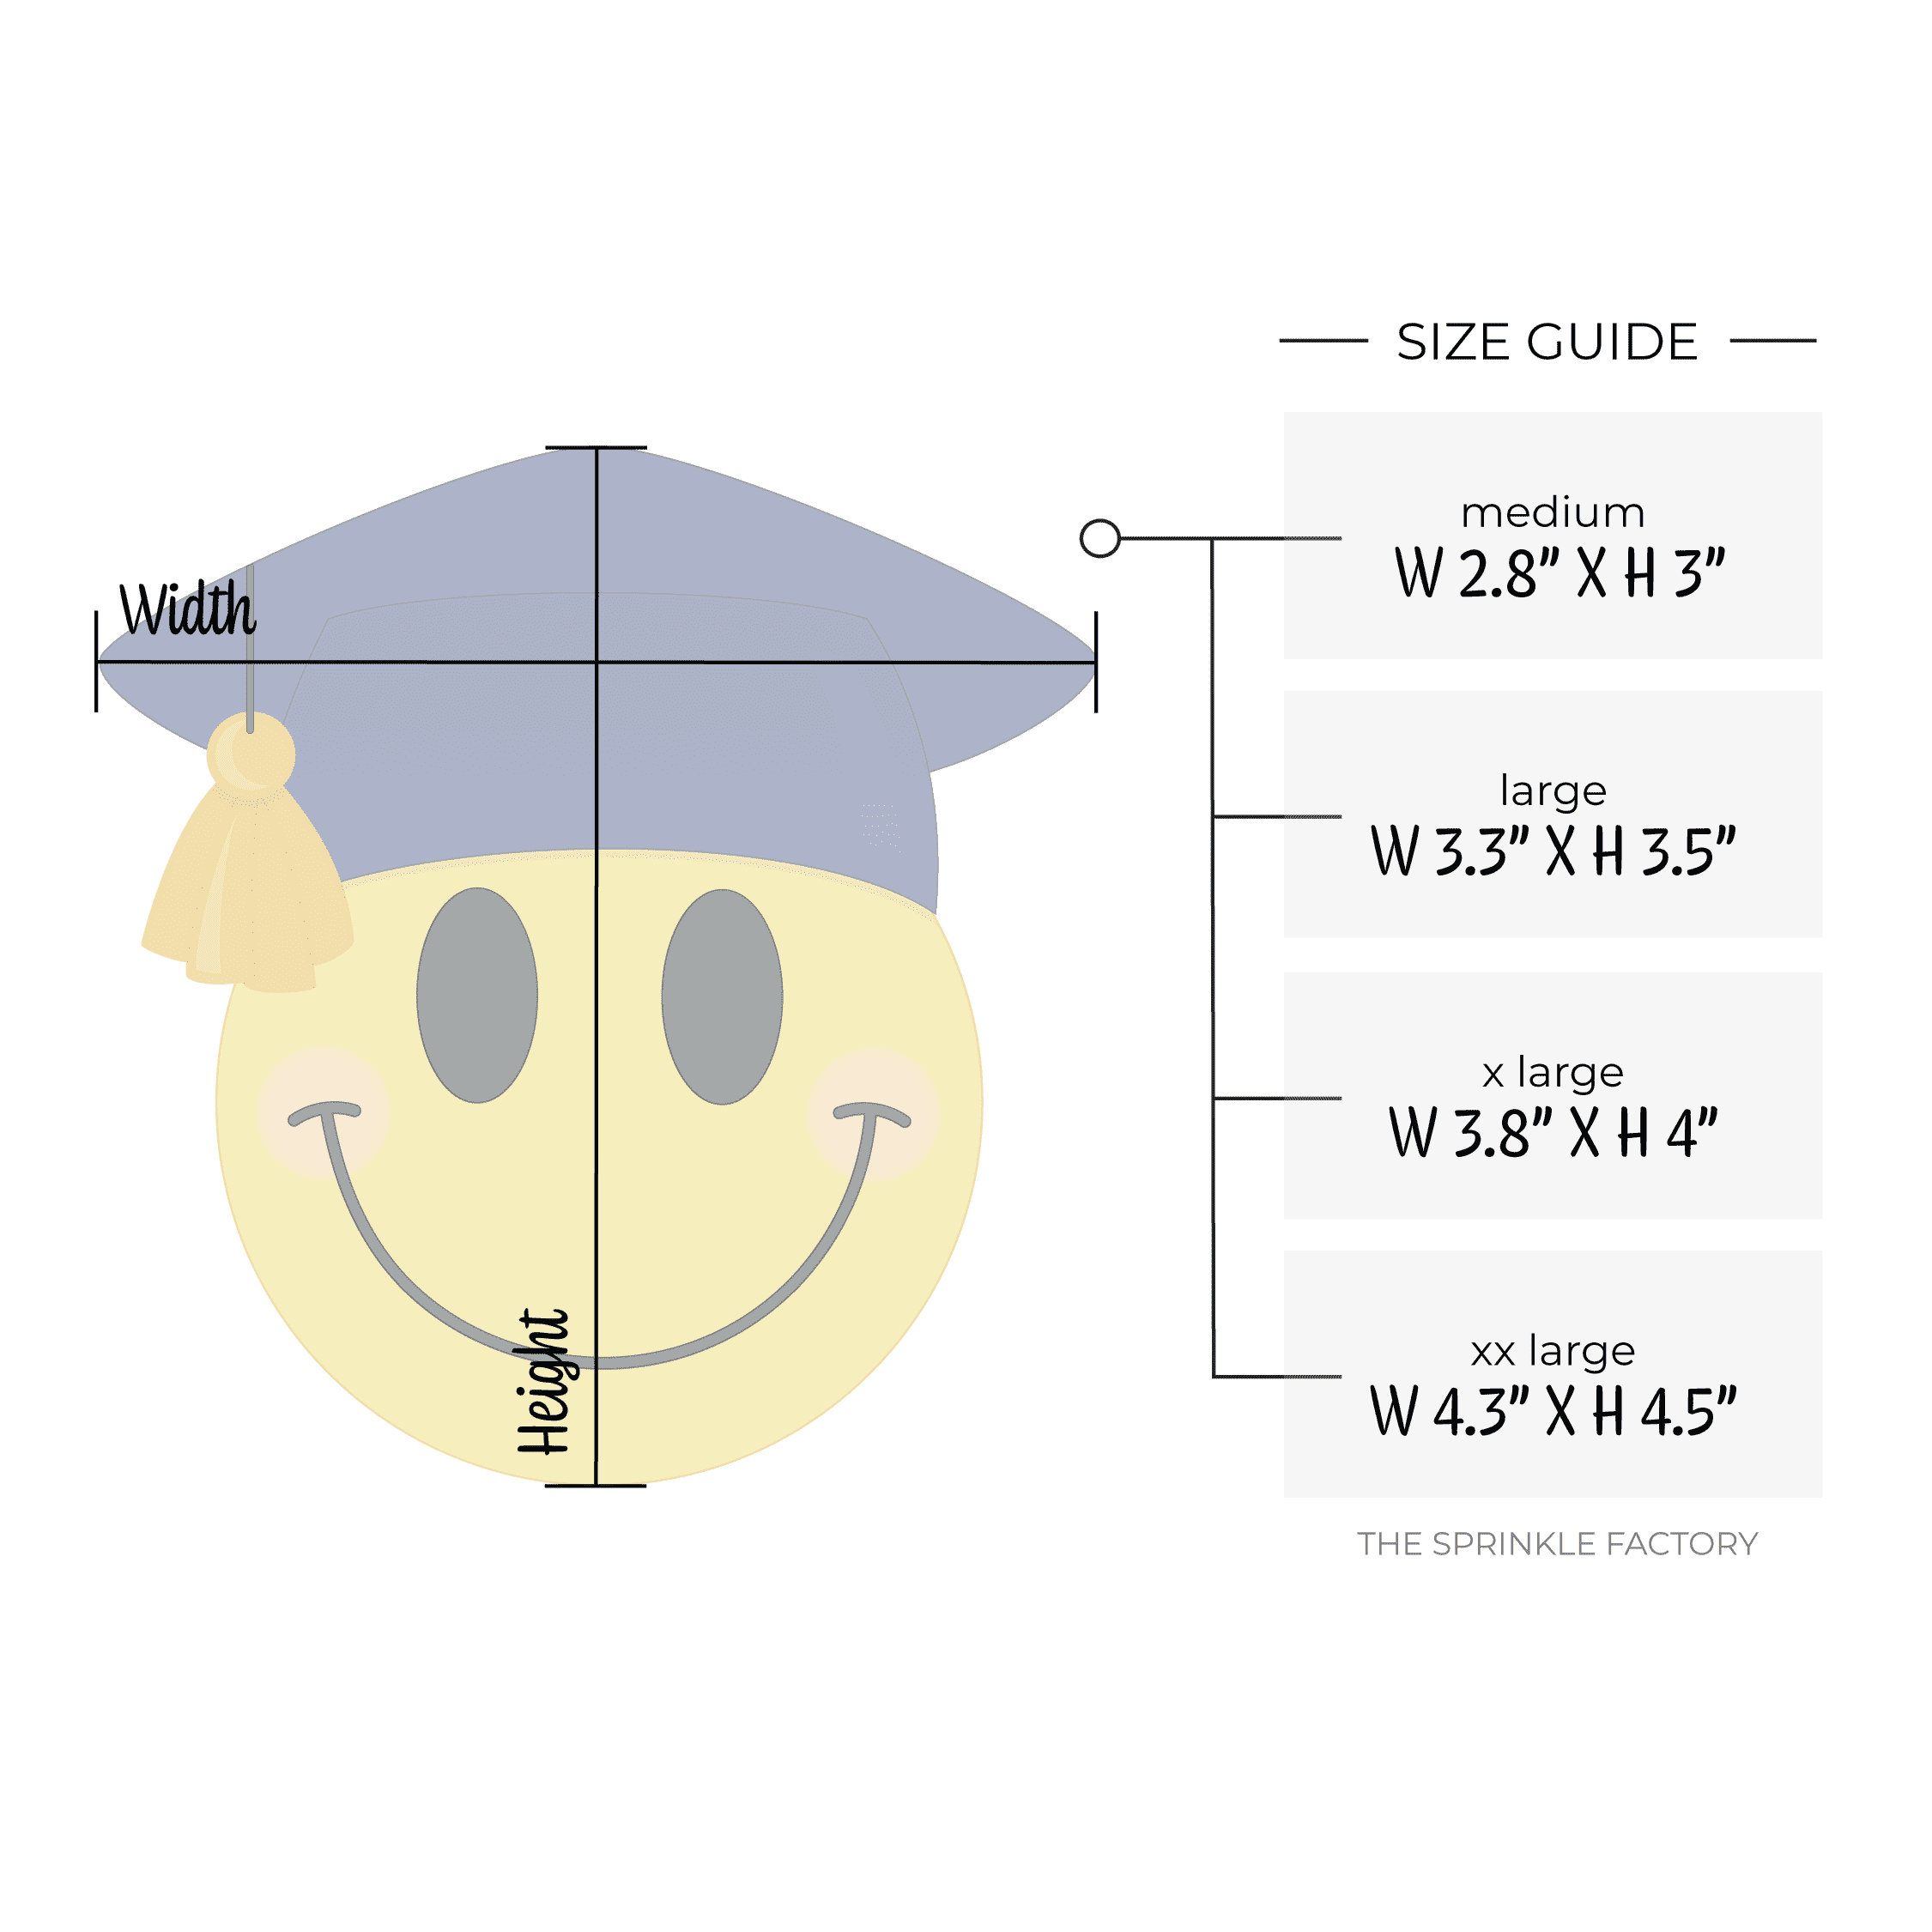 Clipart of a yellow smiley face with black smile and eyes wearing a blue graduation cap with gold tassel with size guide.